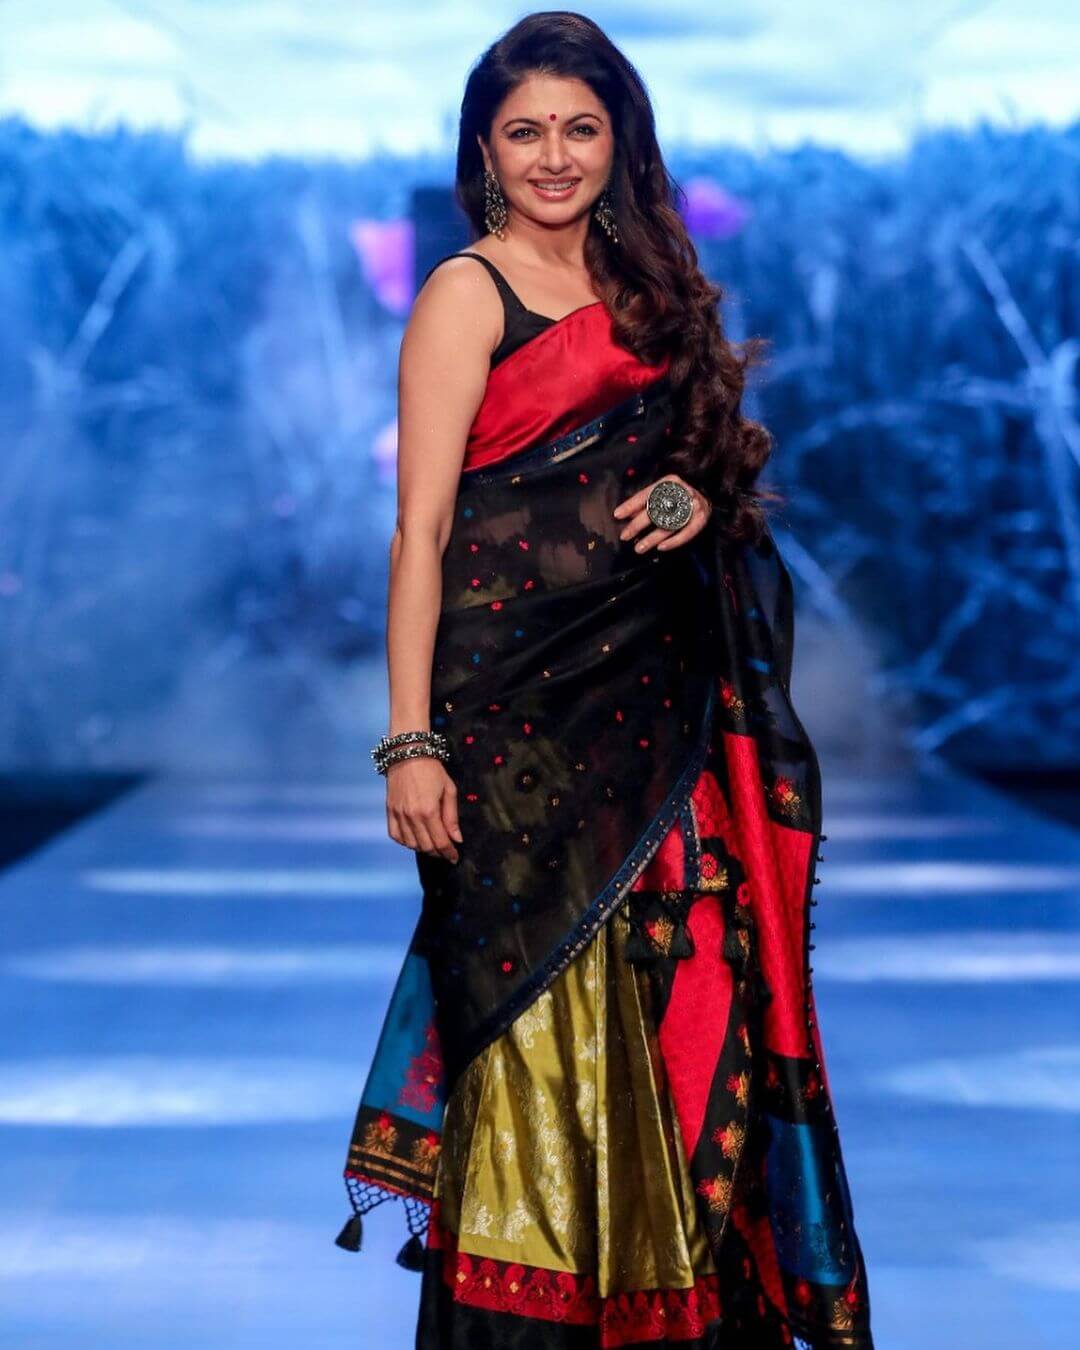 Lakme Fashion Week Bollywood Celebrities Spotted At The Runway - BhagyaShree's Glamour Is Burning The Ramp At Lakme Fashion Week